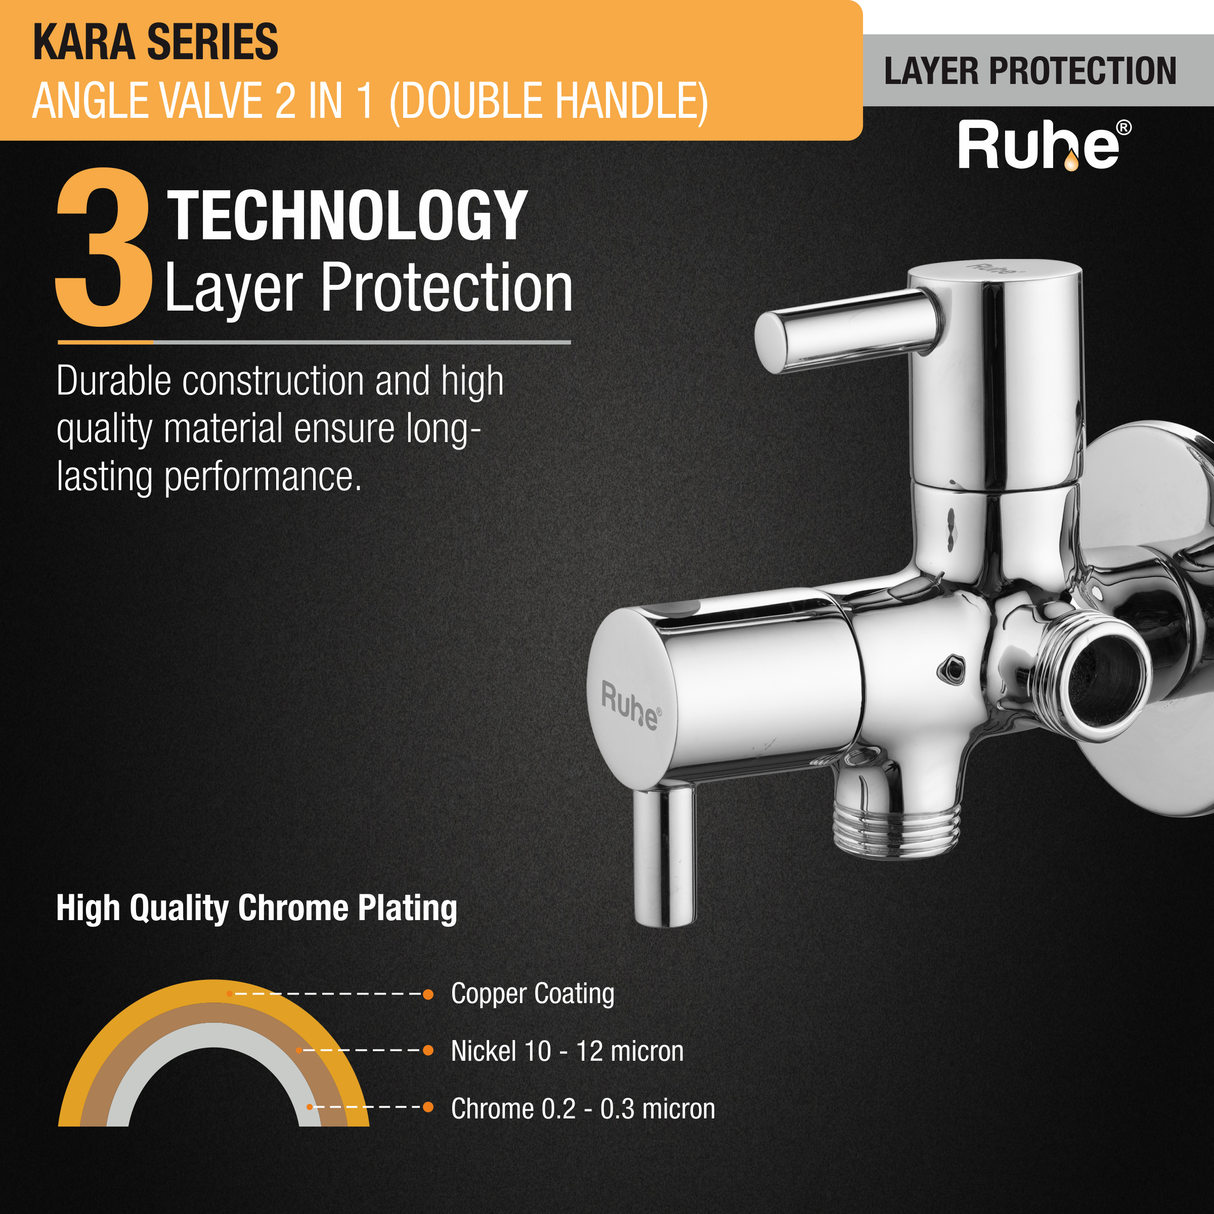 Kara Angle Valve 2 in 1 Double Handle Faucet protection